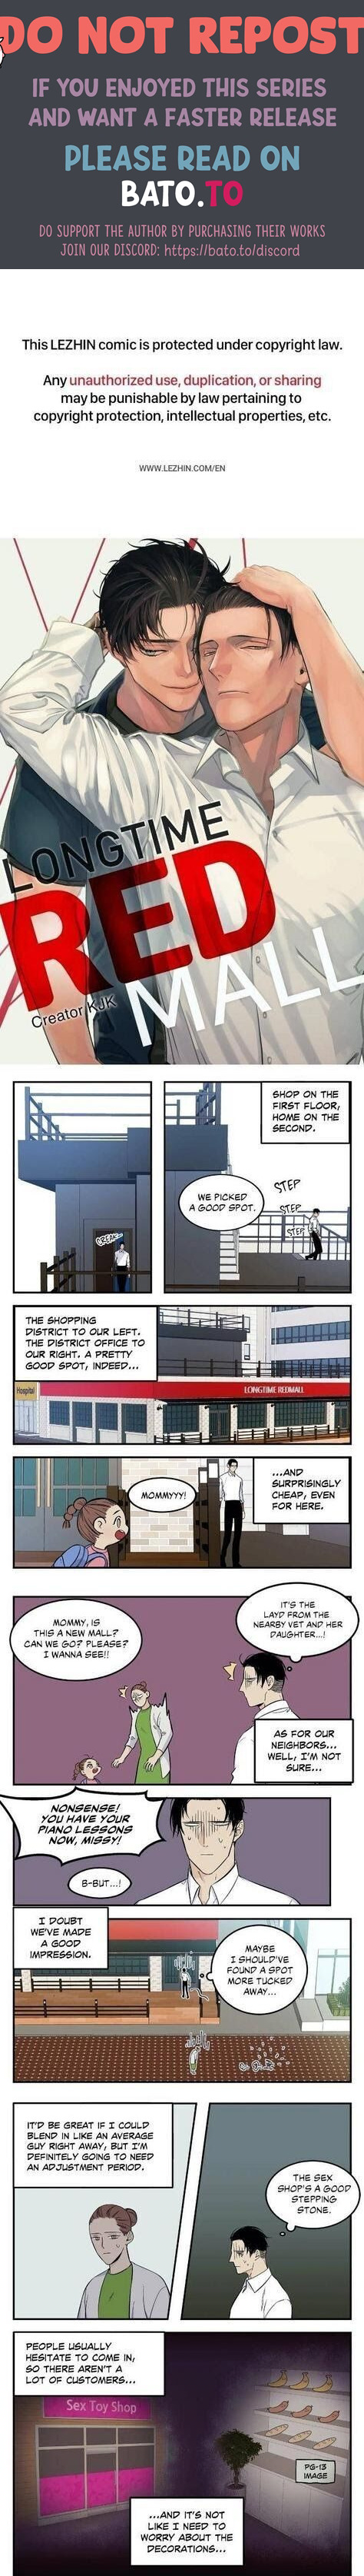 Long Time Red Mall - Page 1